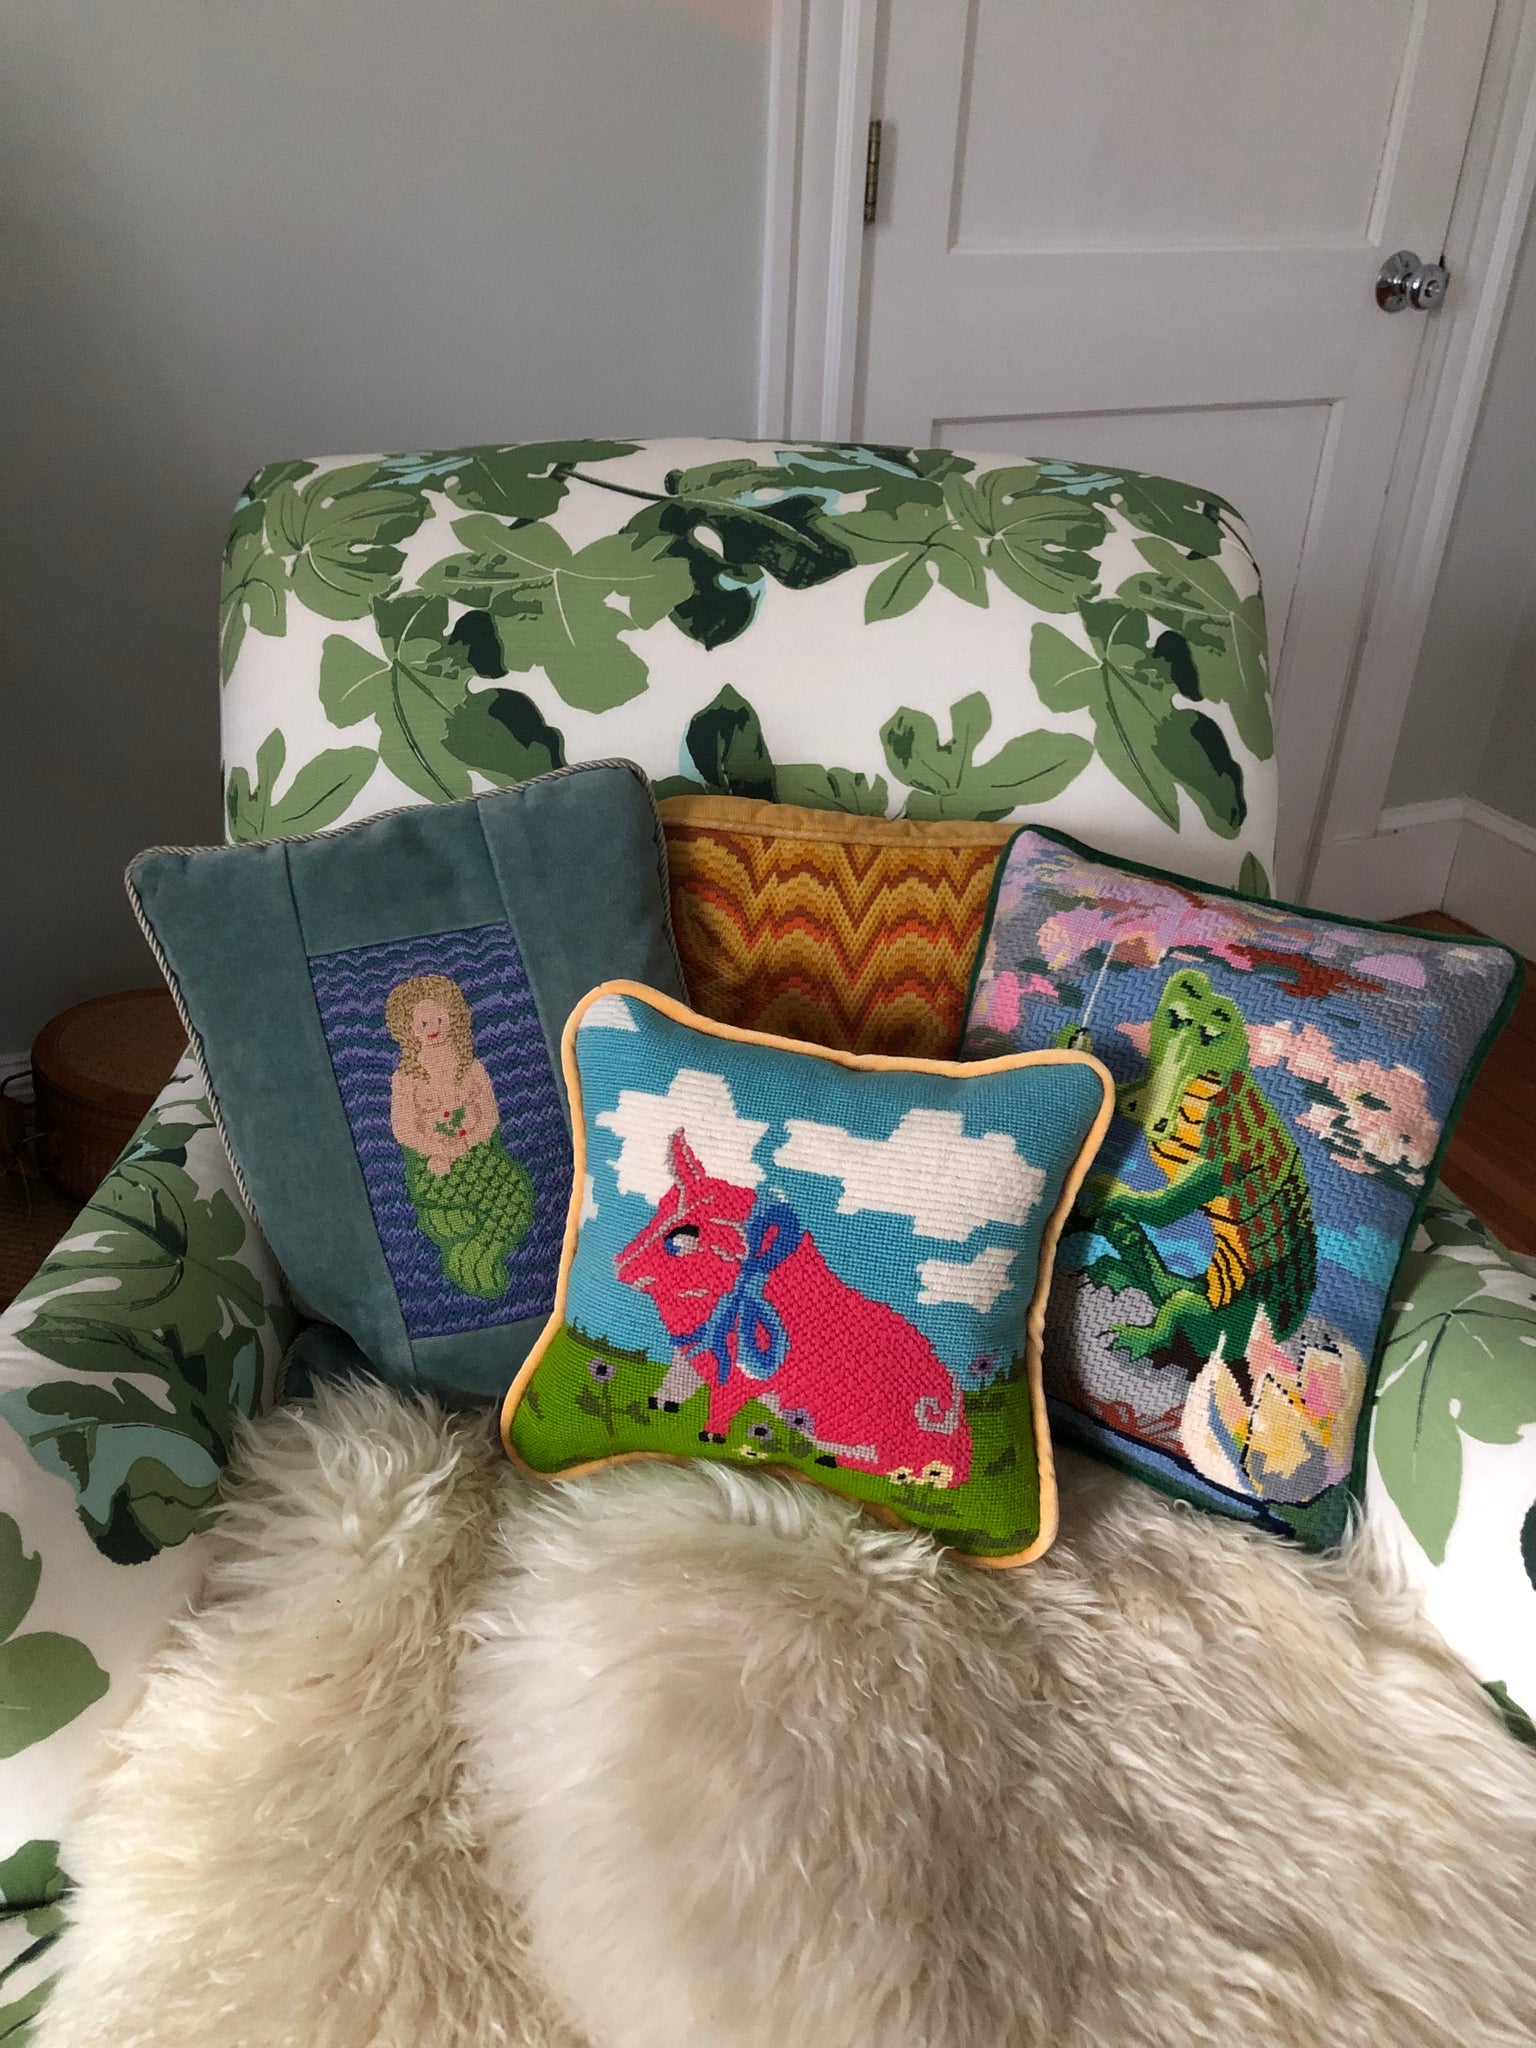 needlepoint pillows on chair